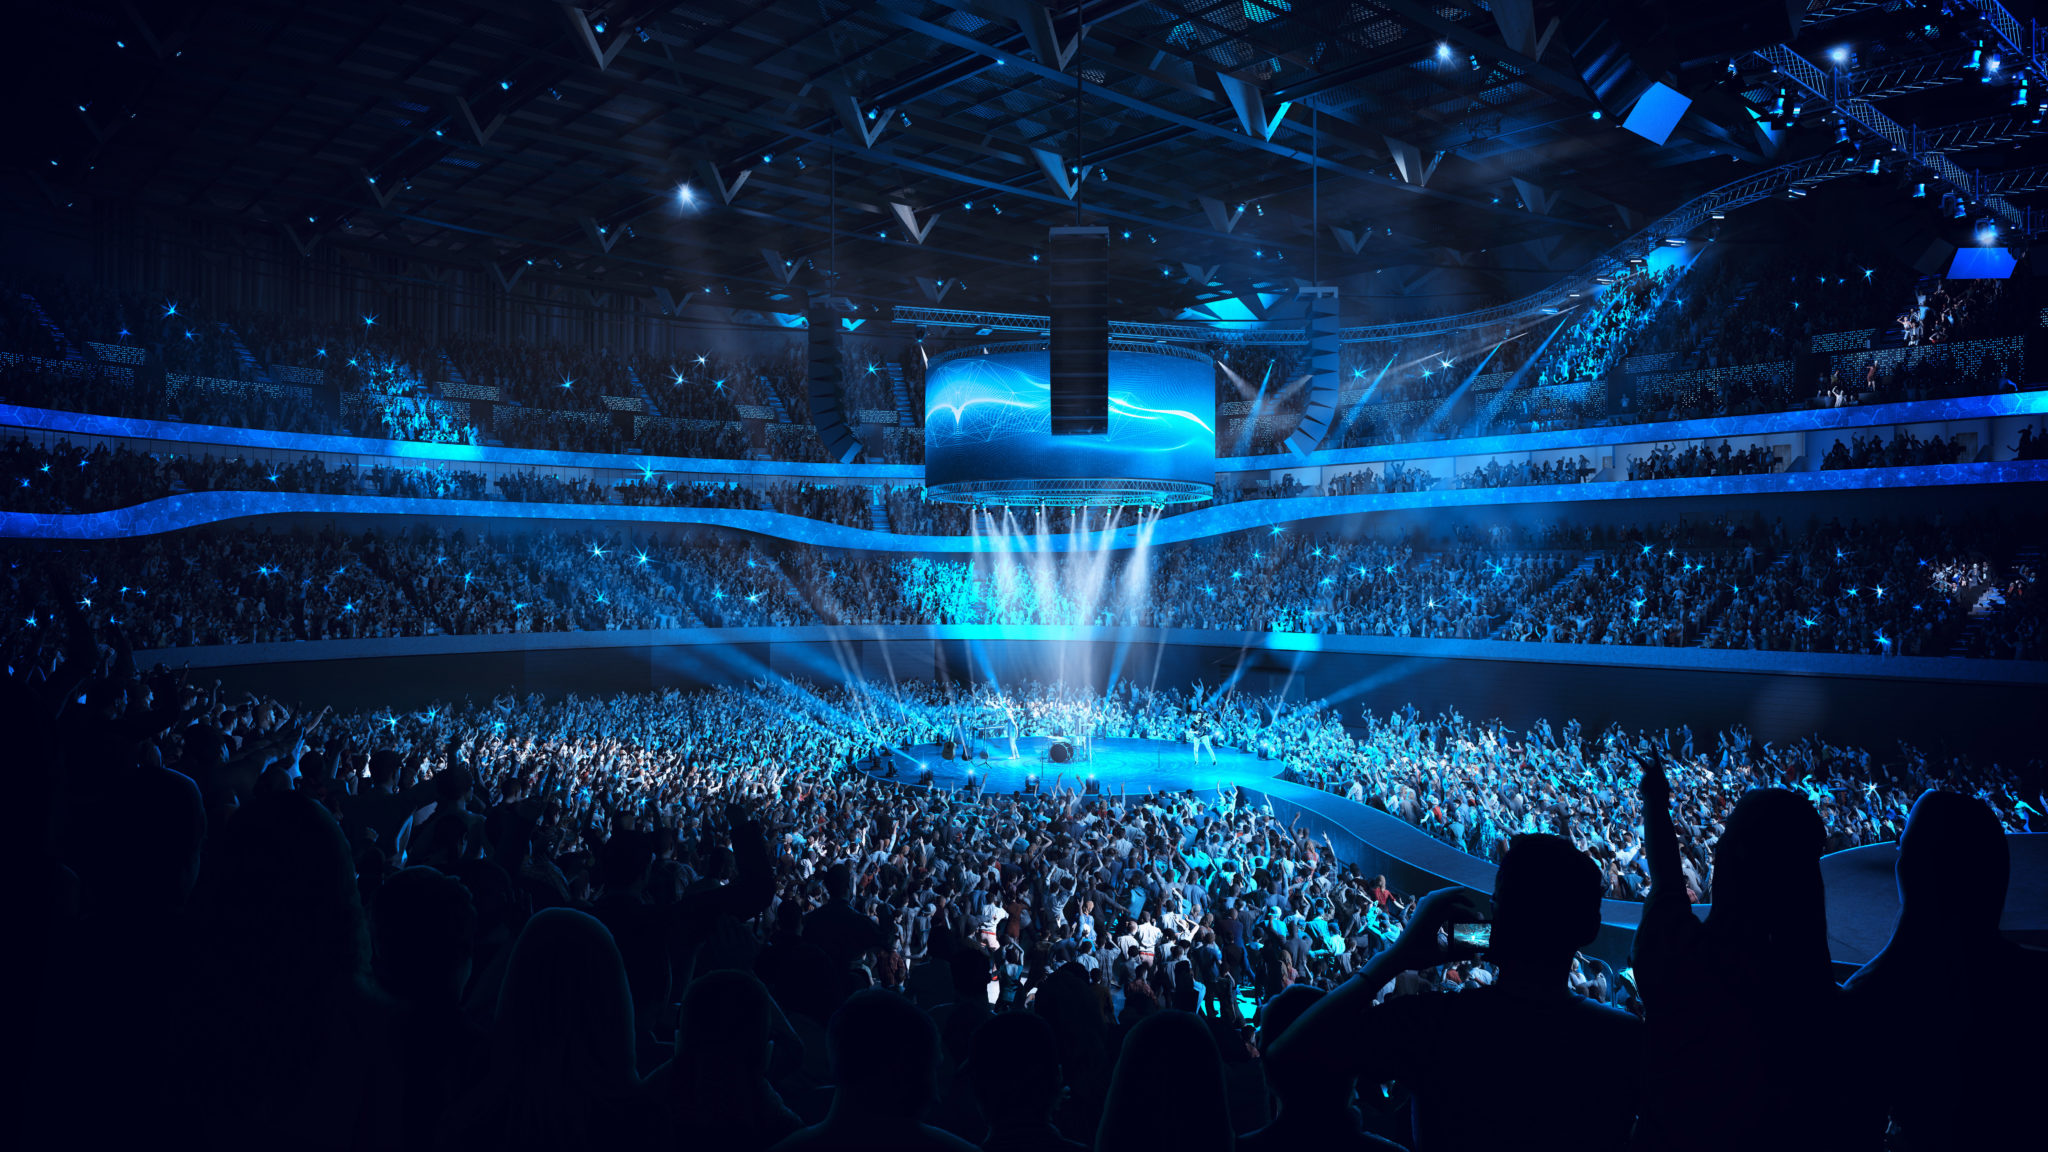 rendering of moody blue lighting during a concert at an indoor arena